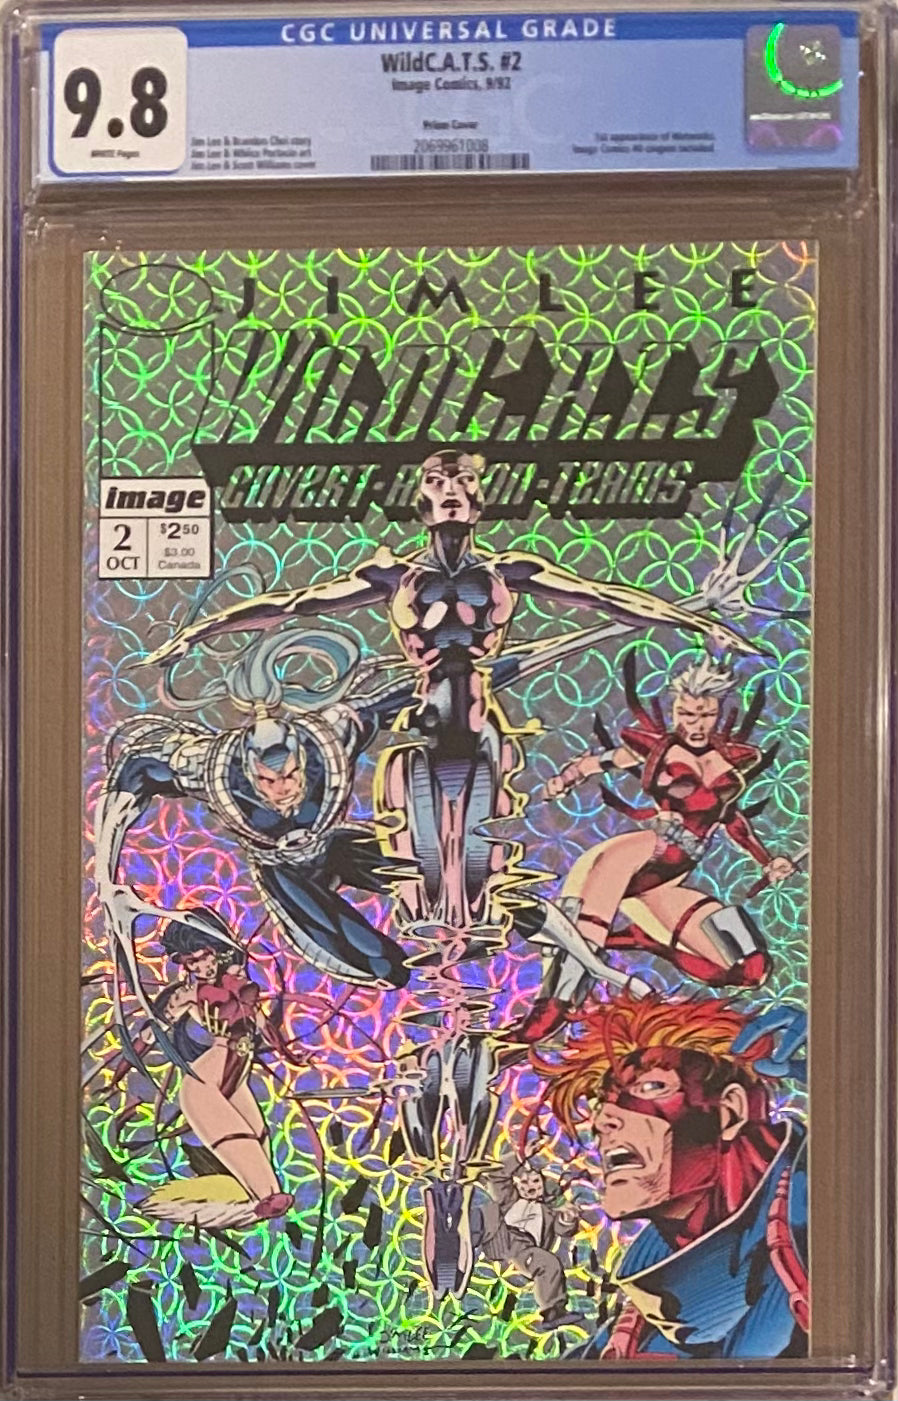 WildC.A.T.S. #2 Prism Cover CGC 9.8